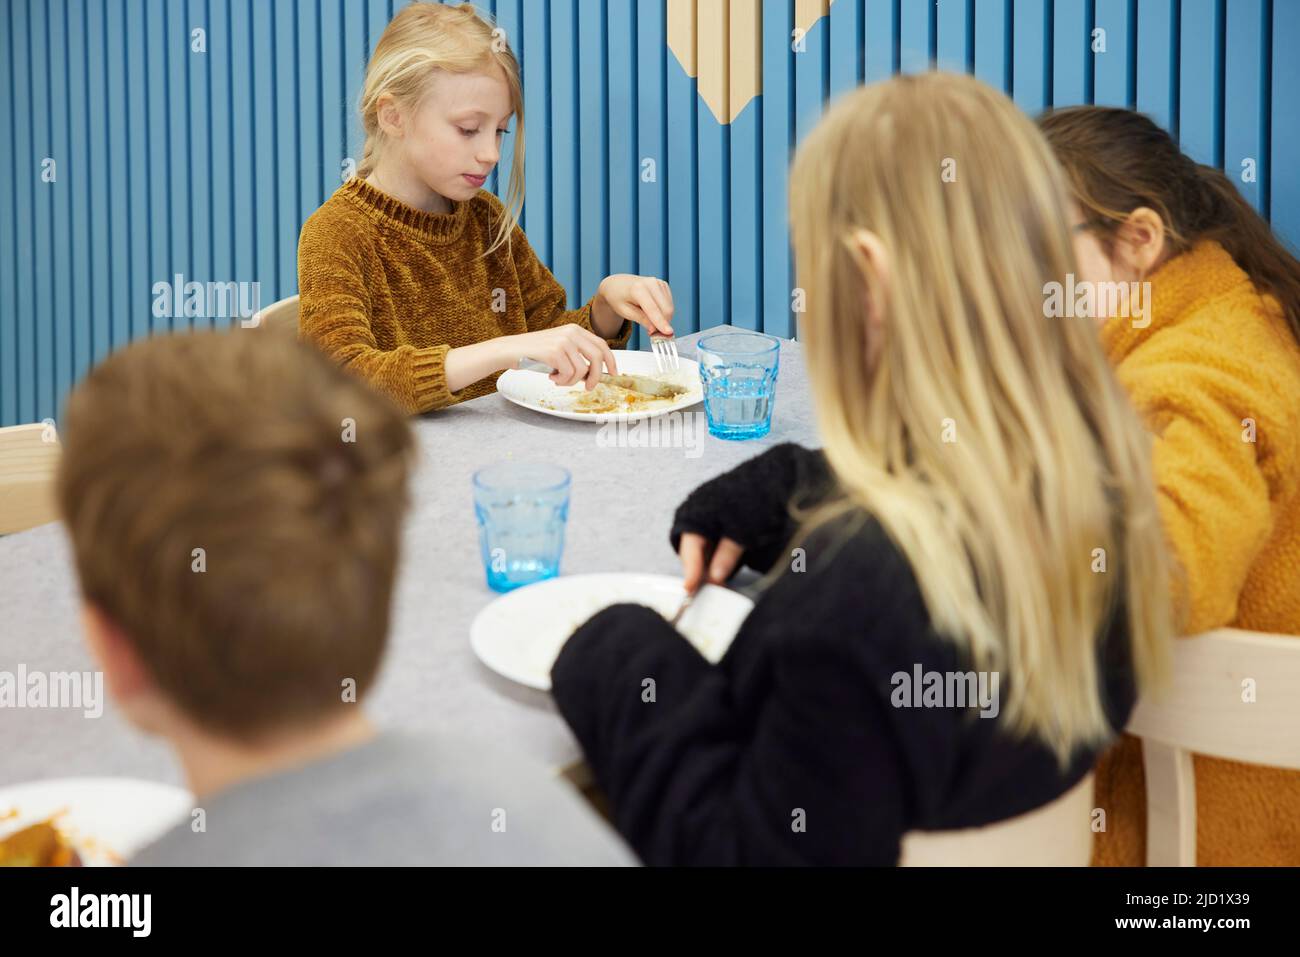 Children having lunch in cafeteria Stock Photo